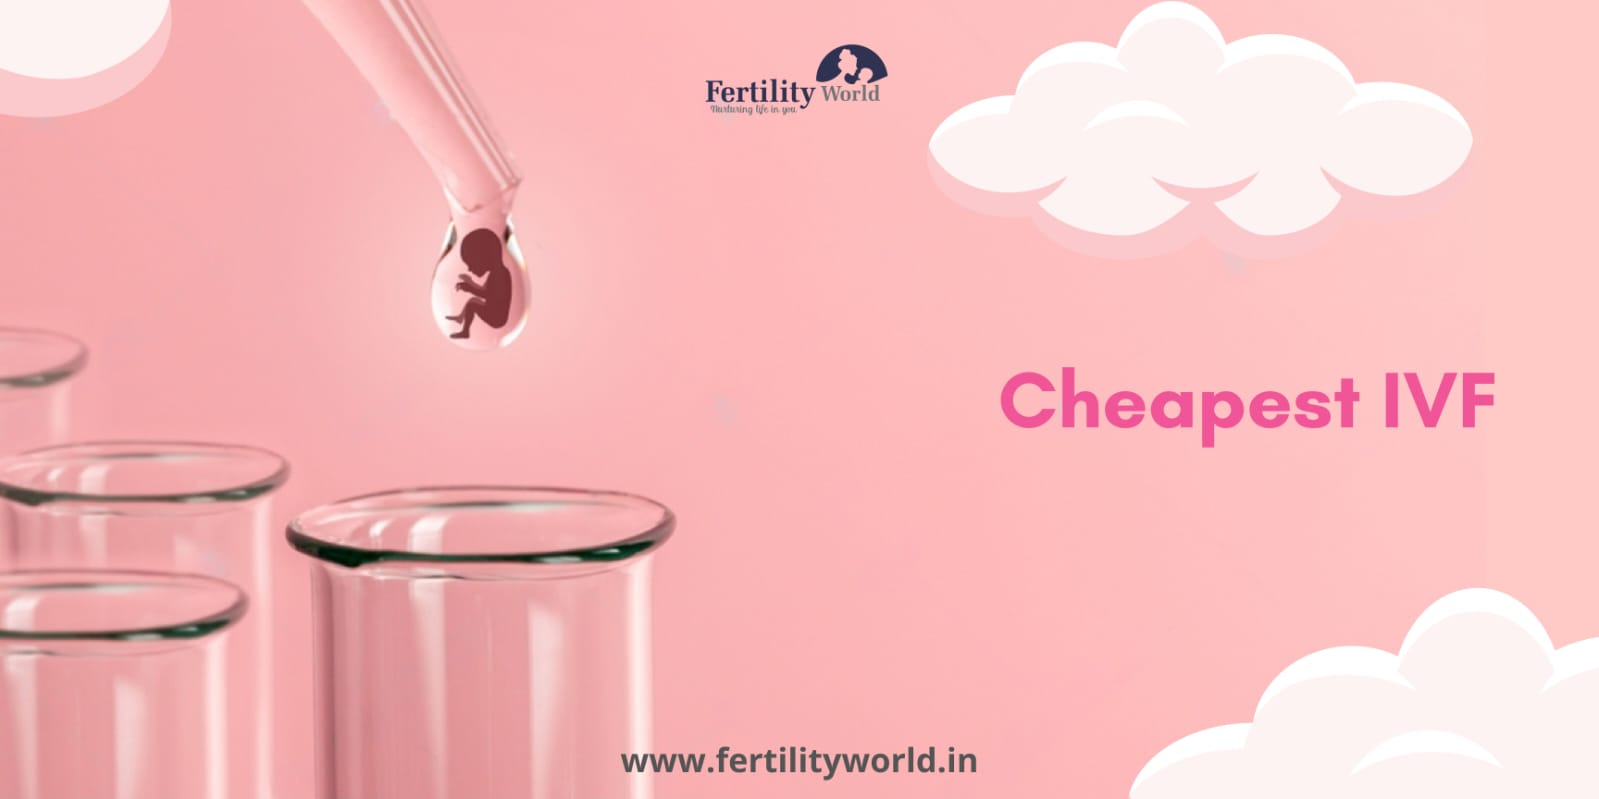 Cheapest IVF cost in India